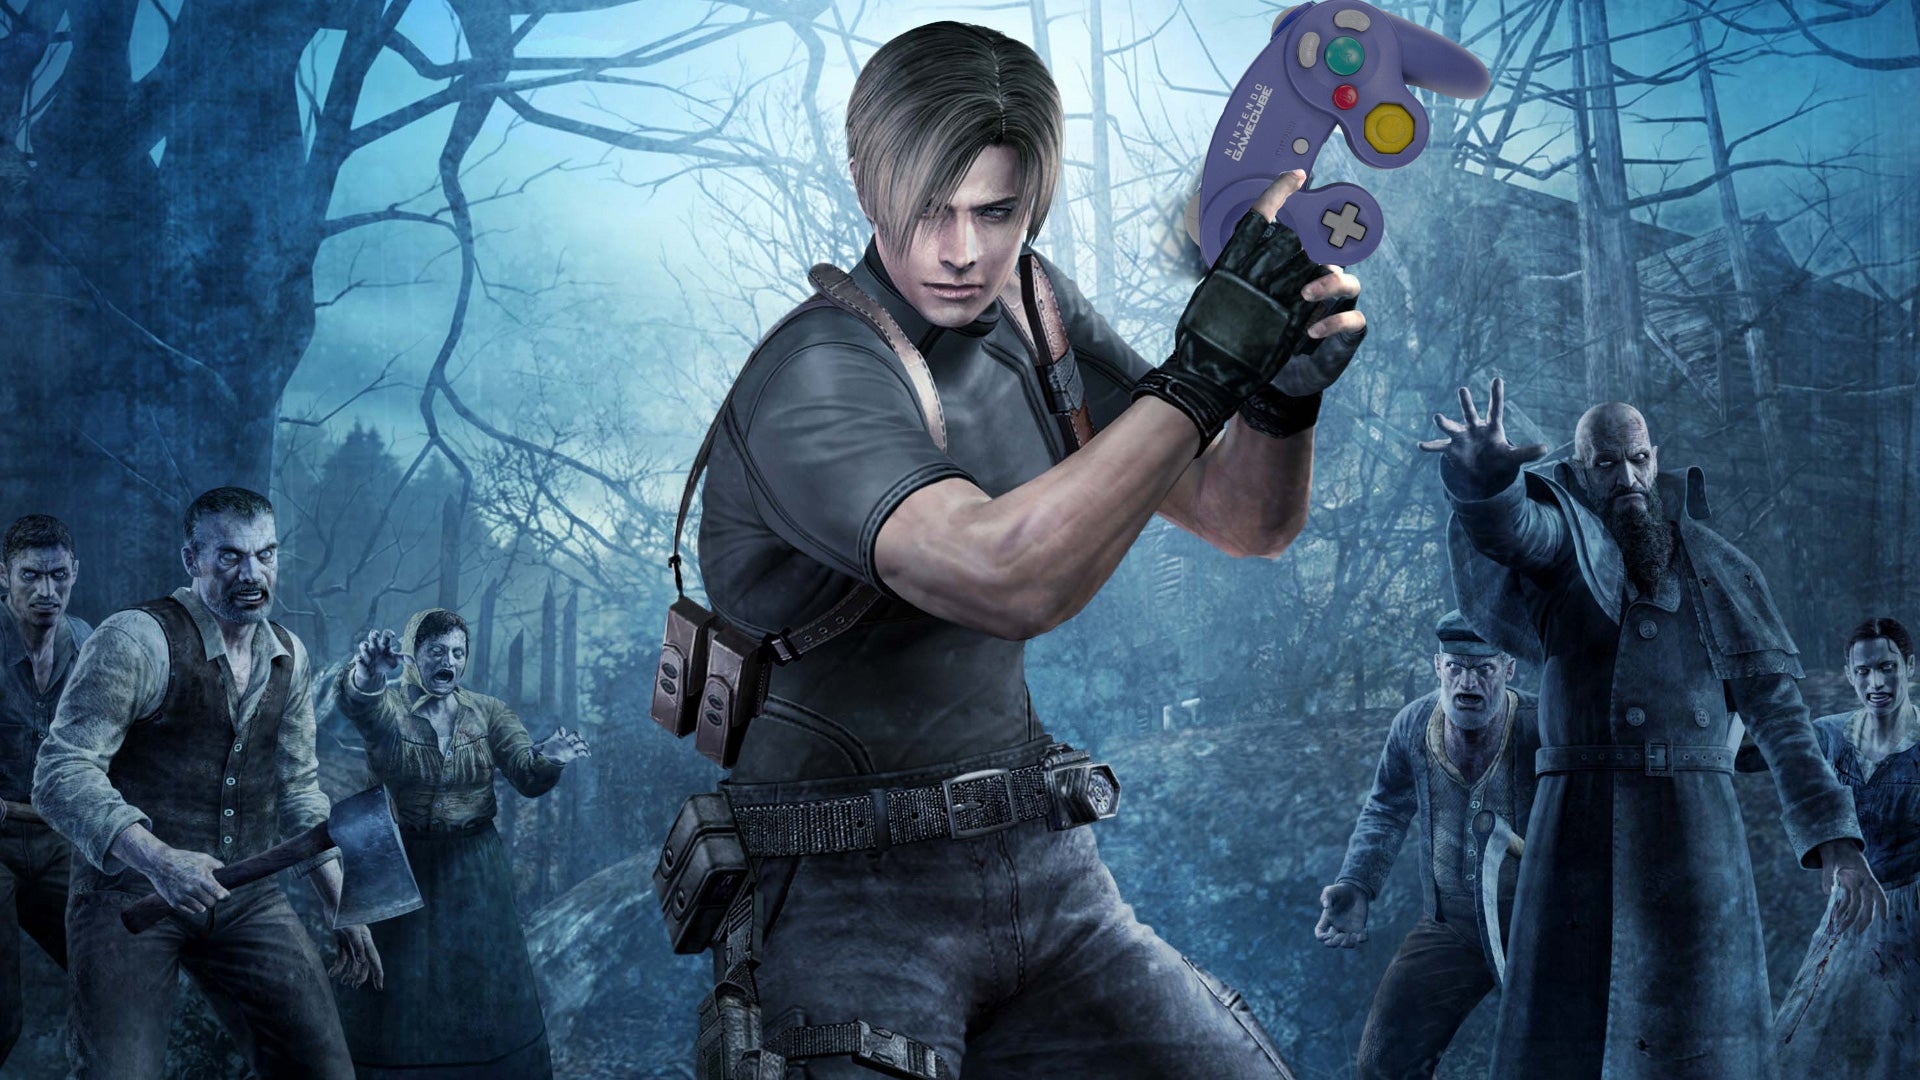 Resident Evil 4s tank controls were not, and are not, a problem VG247